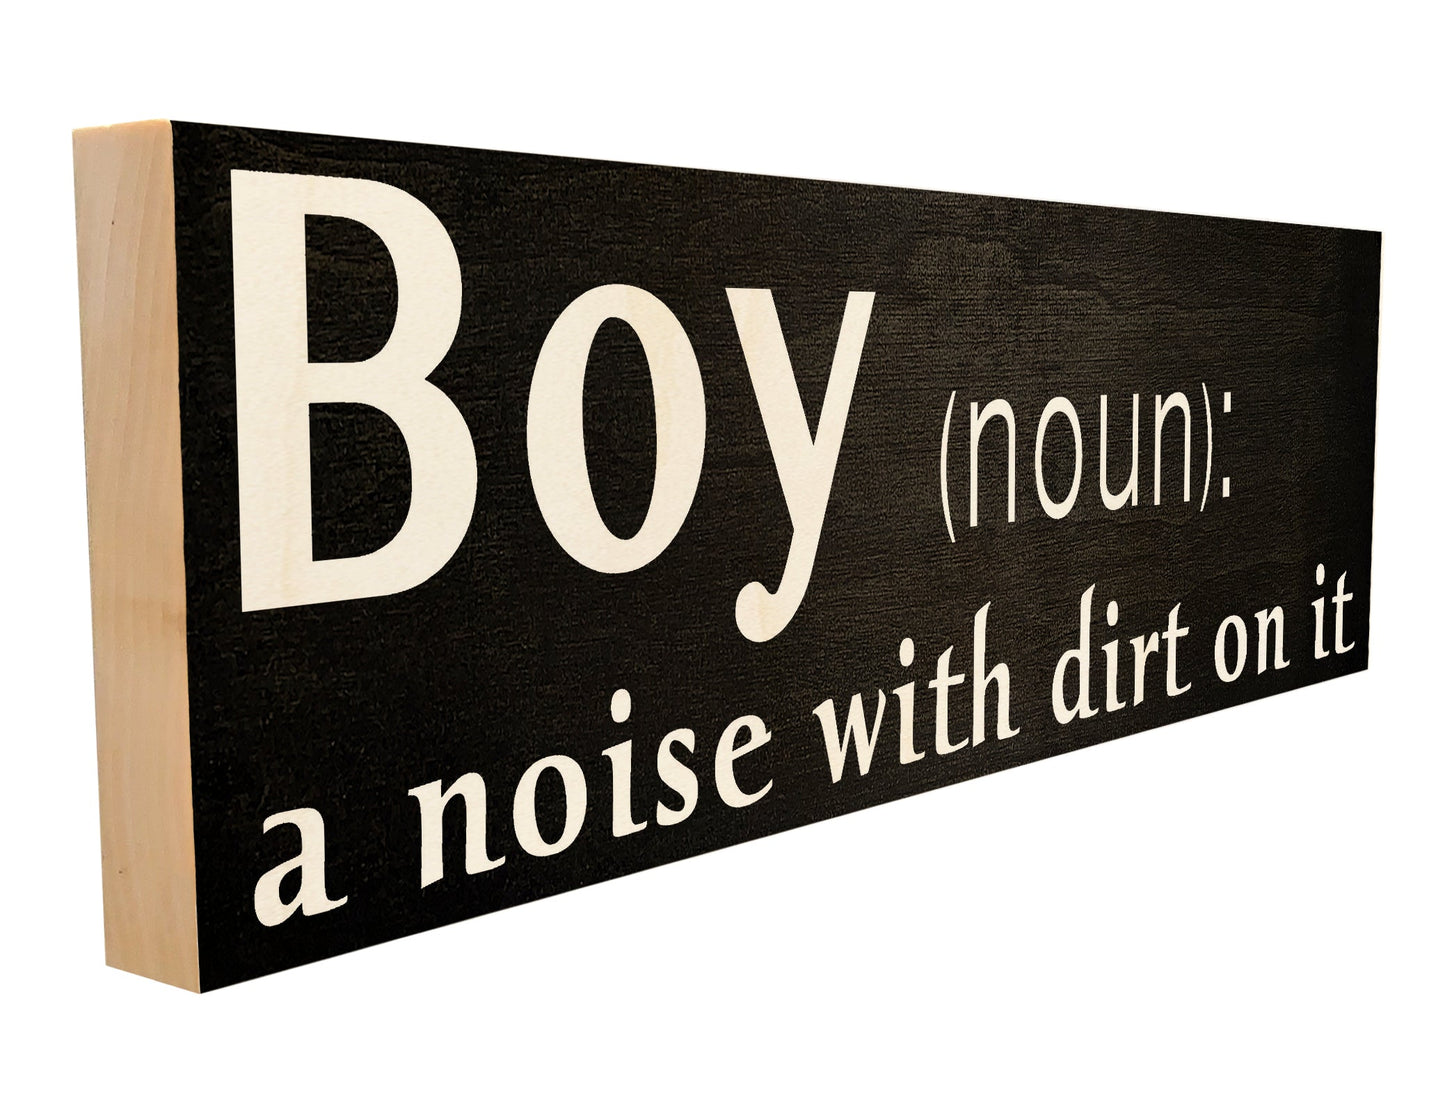 Boy. A Noise with Dirt on it.